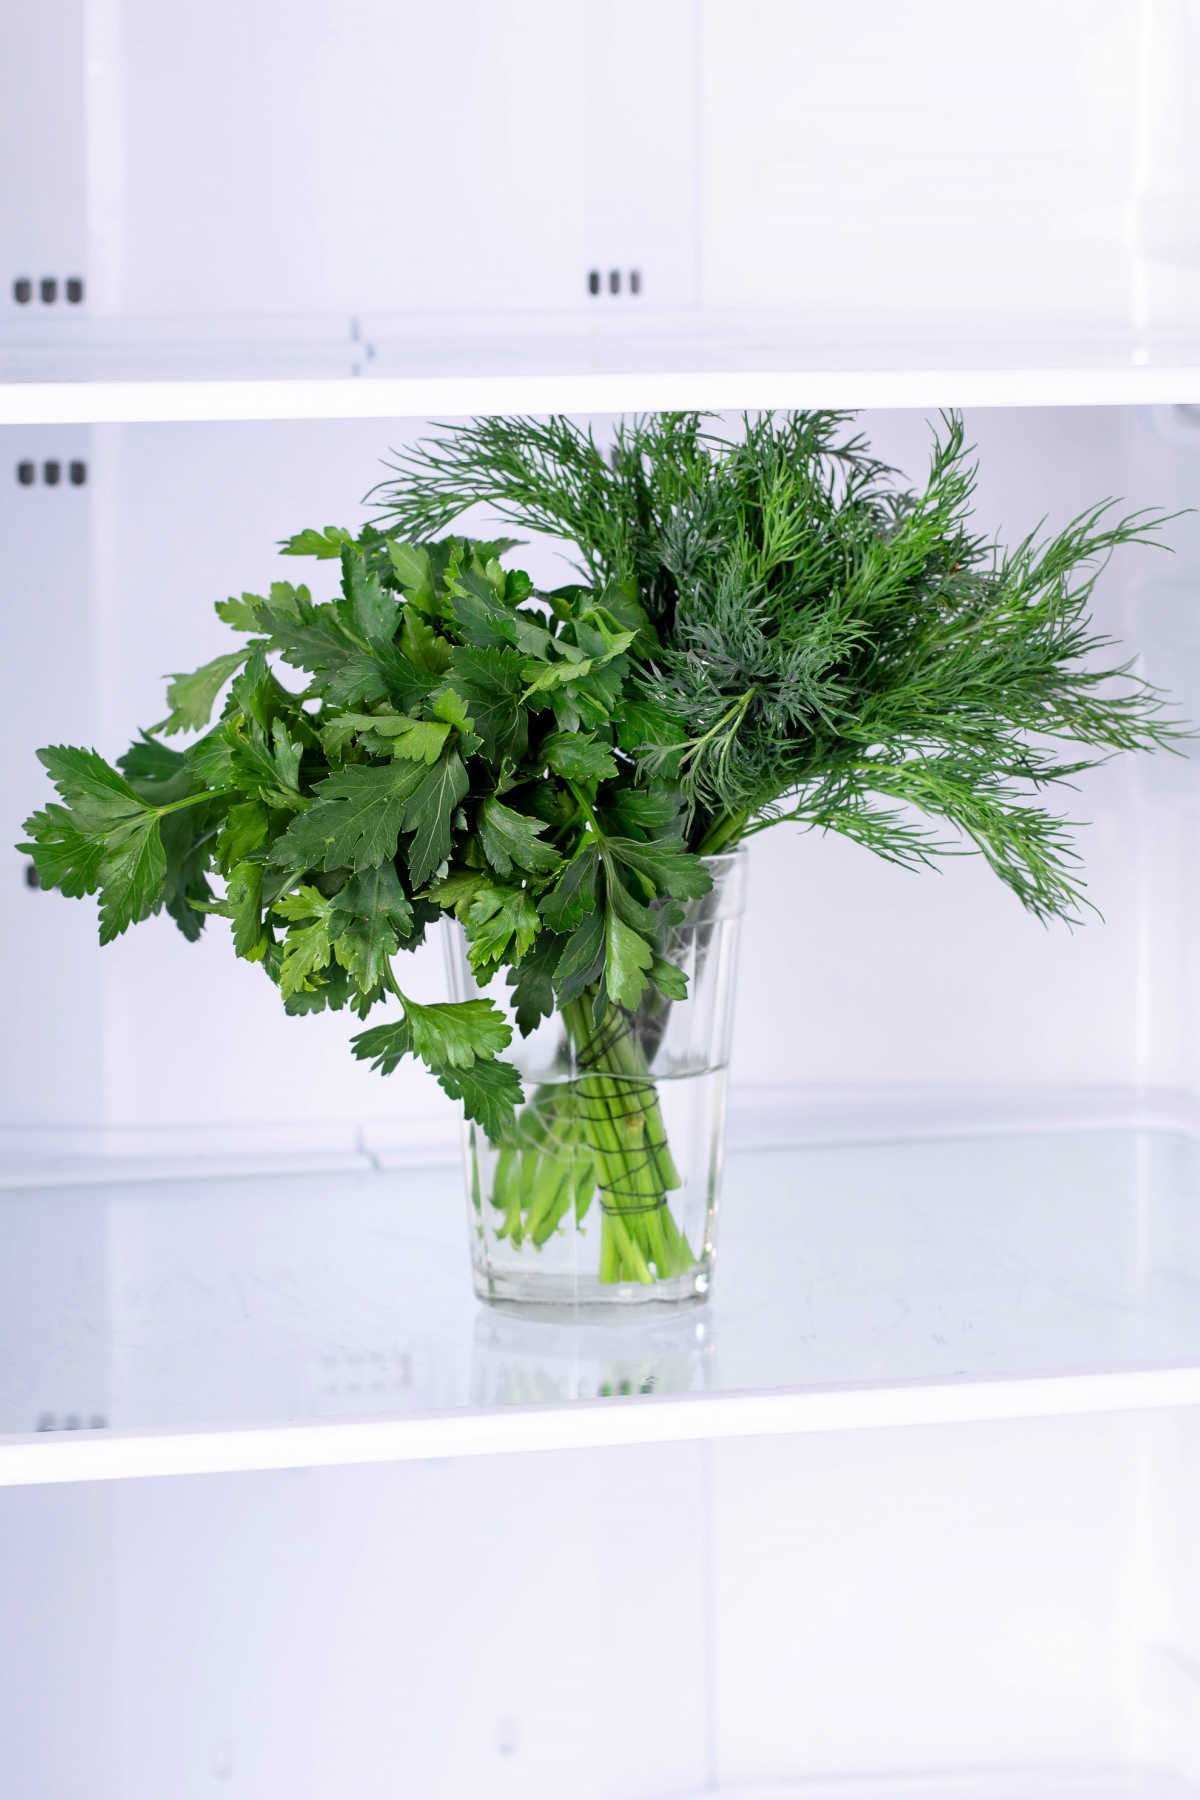 Green fresh parsley and dill in water to store in refrigerator